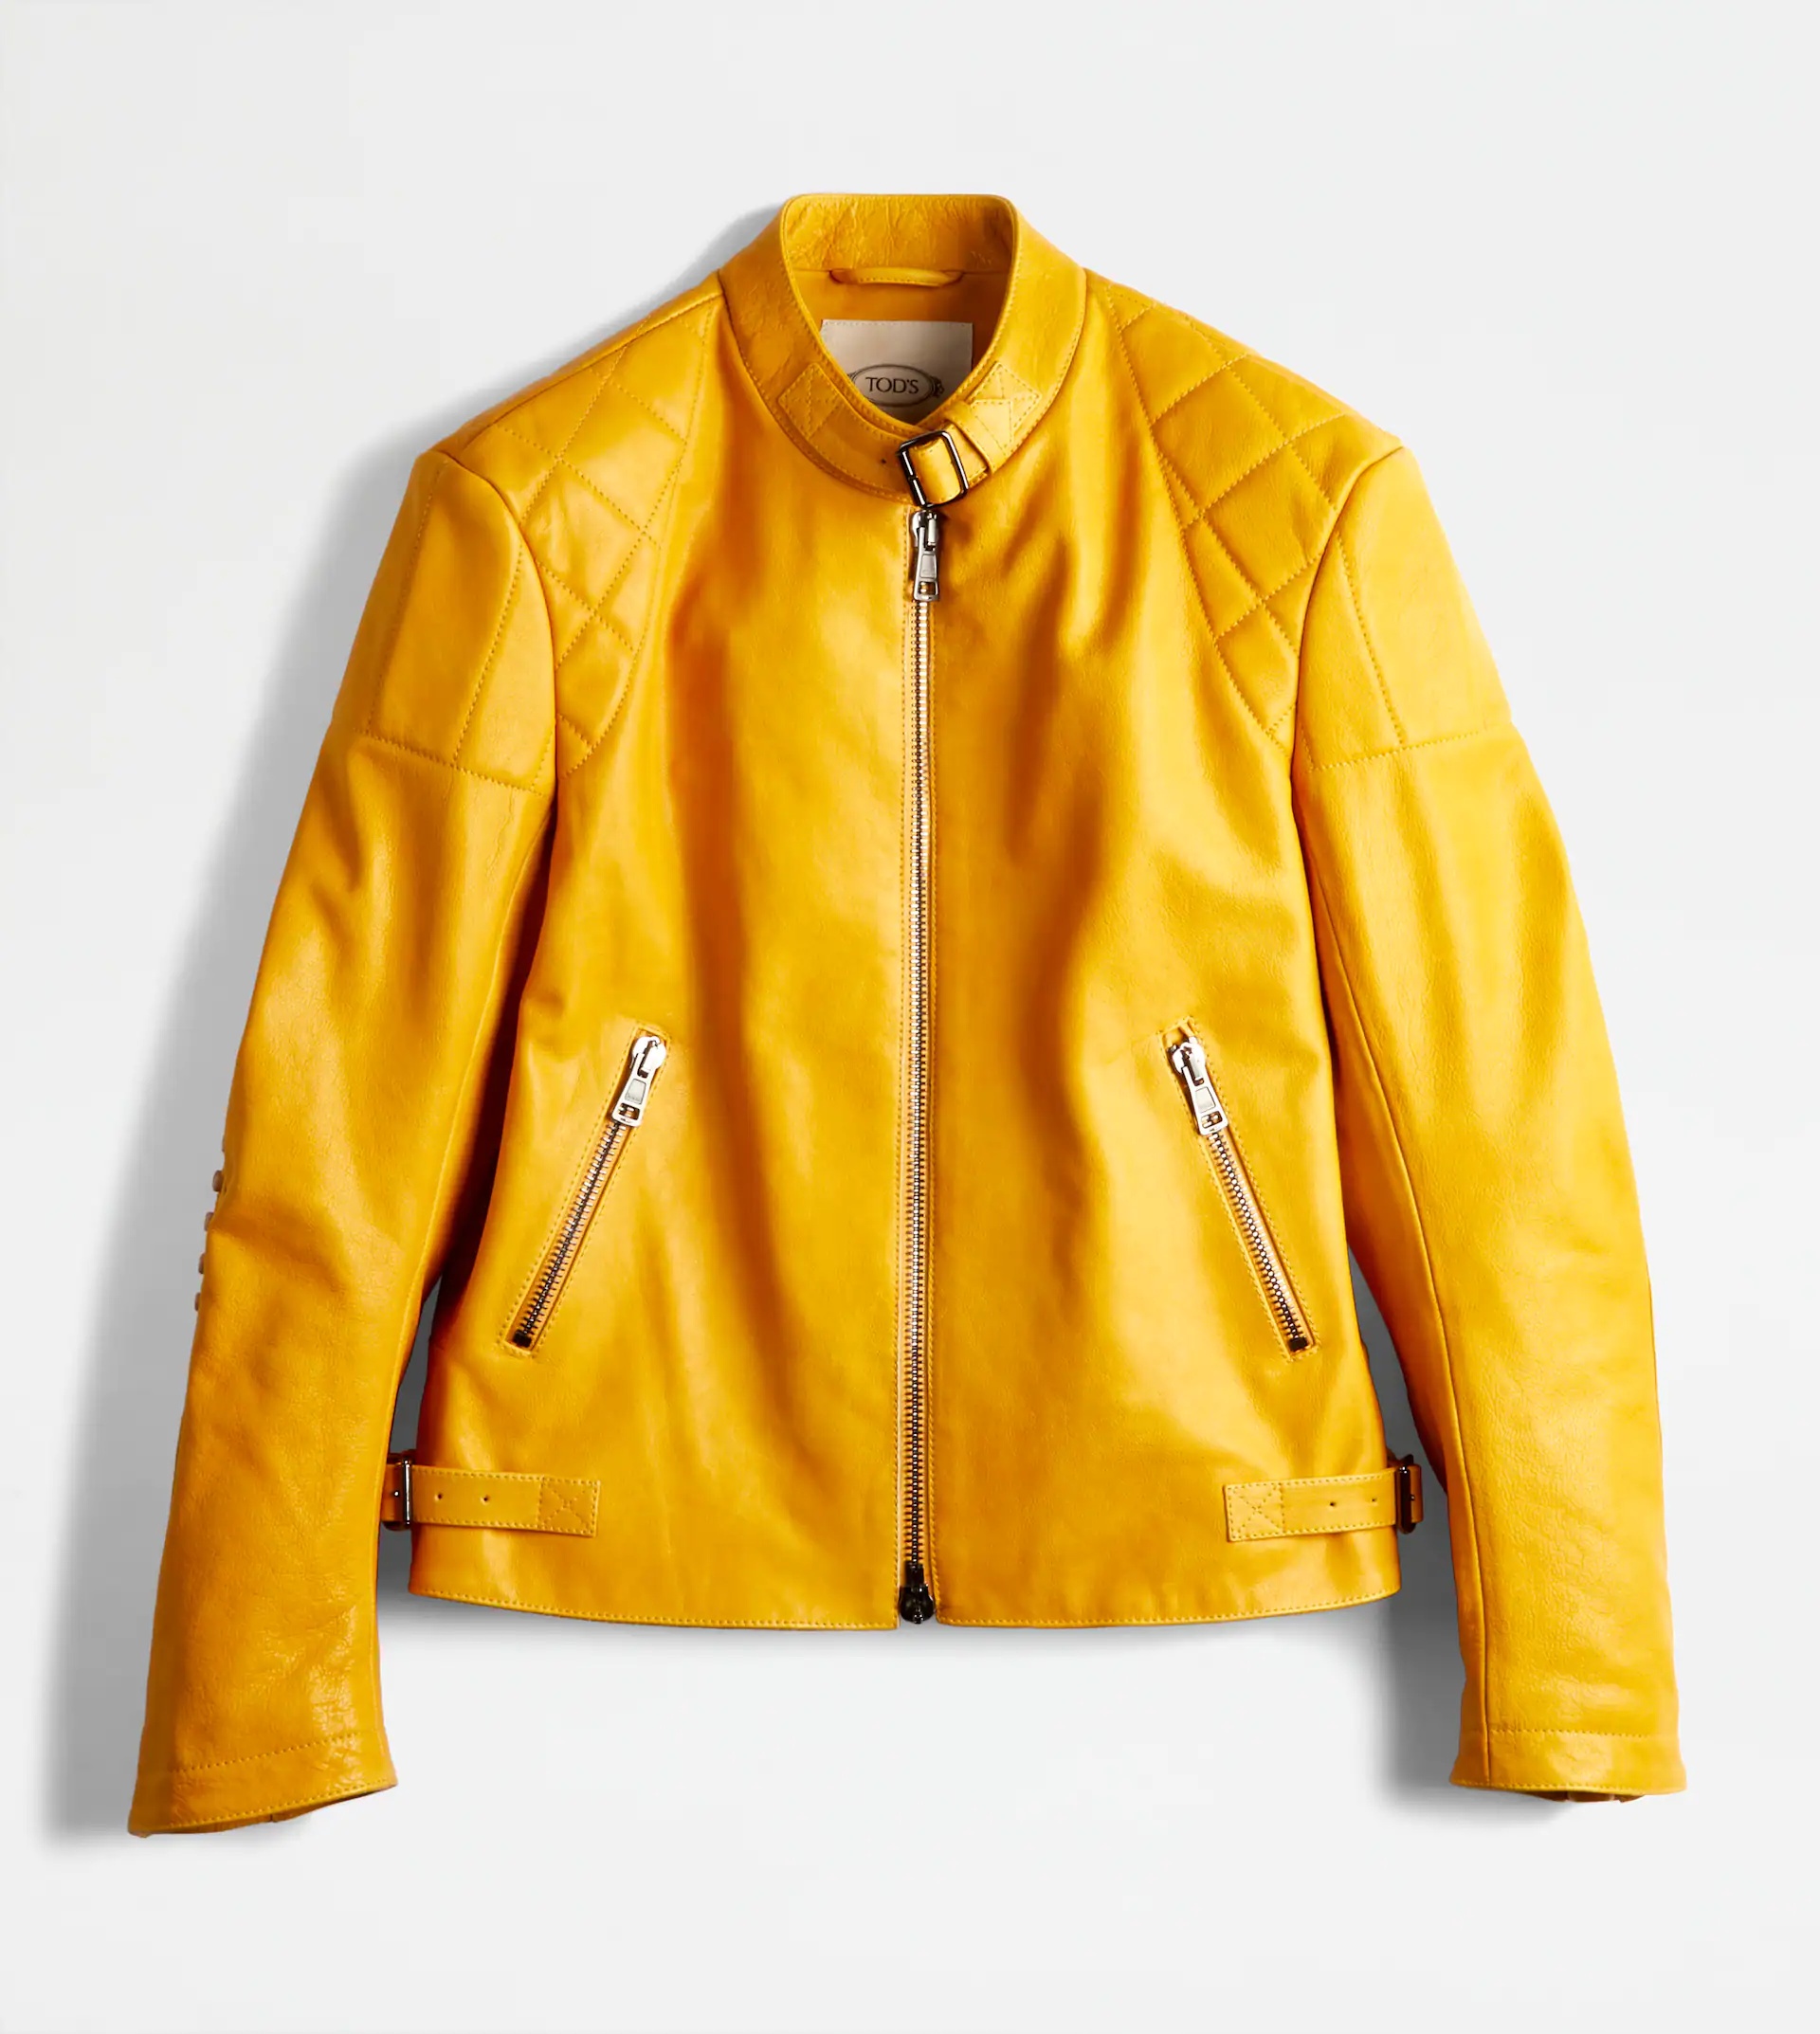 TOD'S BIKER IN LEATHER - YELLOW - 1